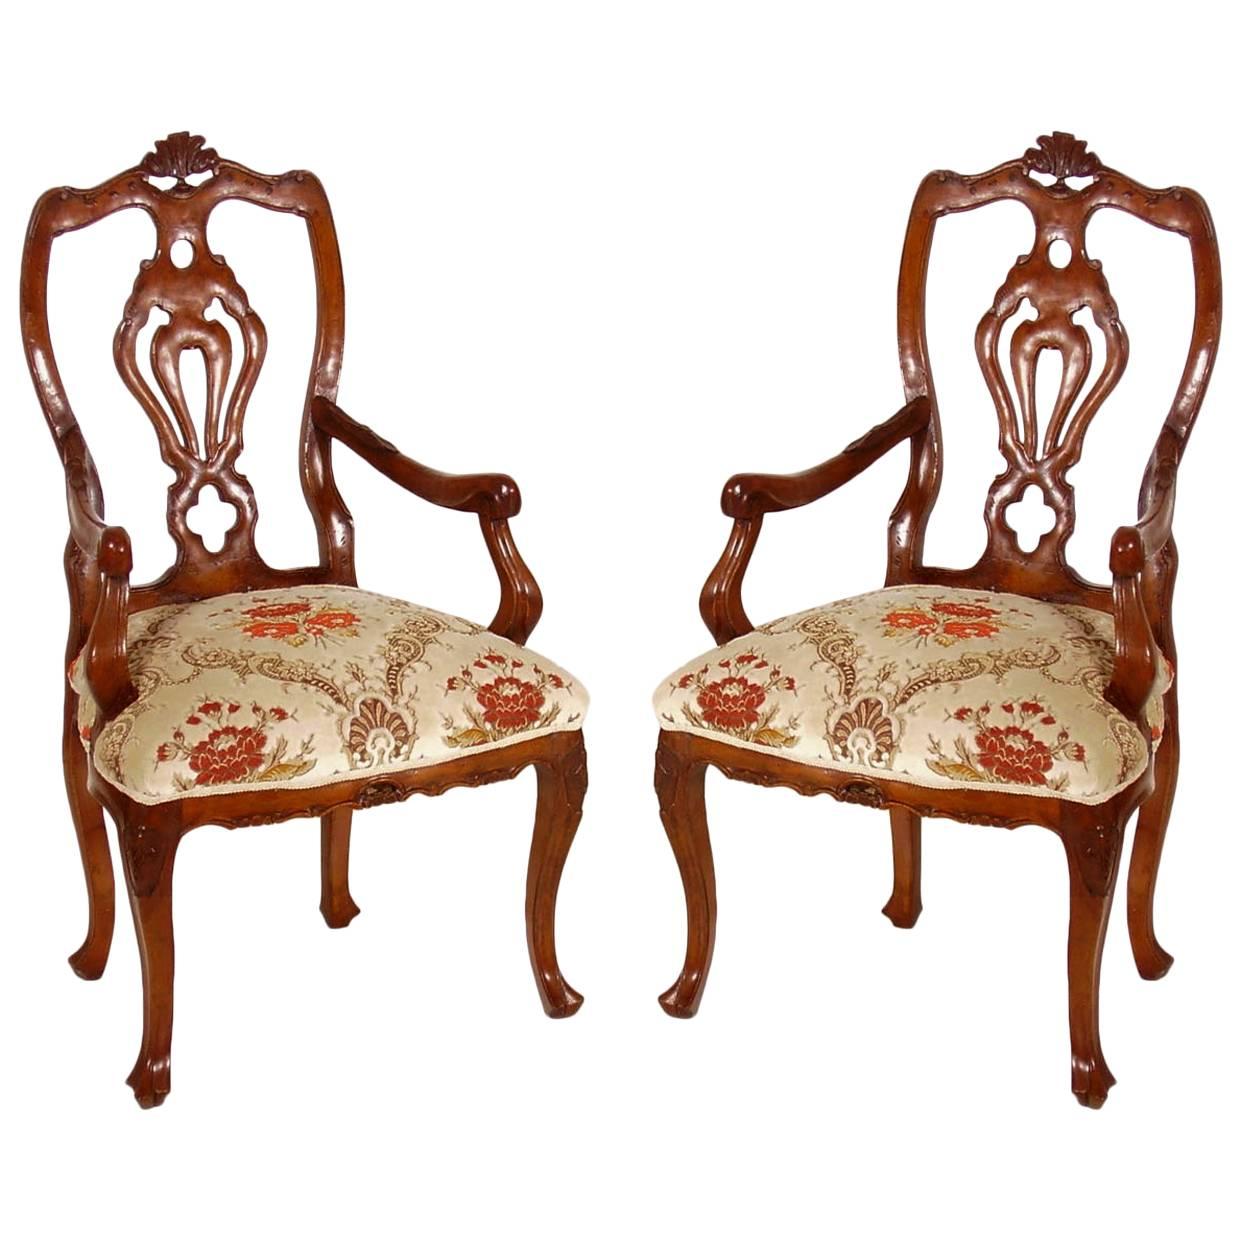 Pair 18th Century Venetian Rococo Armchairs in Walnut with Richly Carved Detail